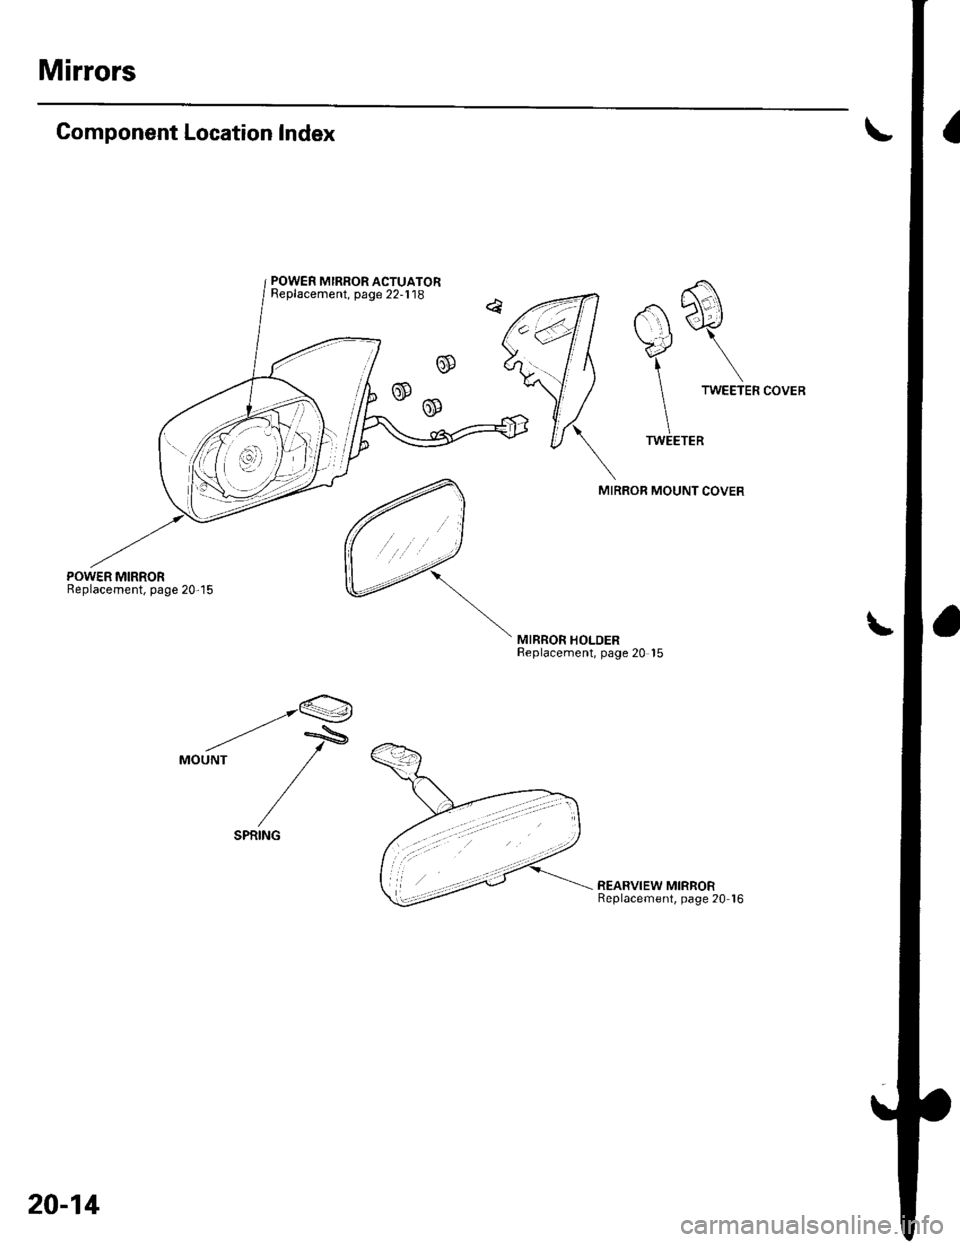 HONDA CIVIC 2003 7.G Workshop Manual Mirrors
Component Location Index
POWER MIRRORReplacement, page 20-15
.a b\.\|  \-r<,,/
\.J \\.4 \
1\
 
TWEETER
TWEETER
MIRROR MOUNT COVER
MIRROR HOLDERReplacement, page 20 15
__.Q
--MOUNT 
/
/
REAR